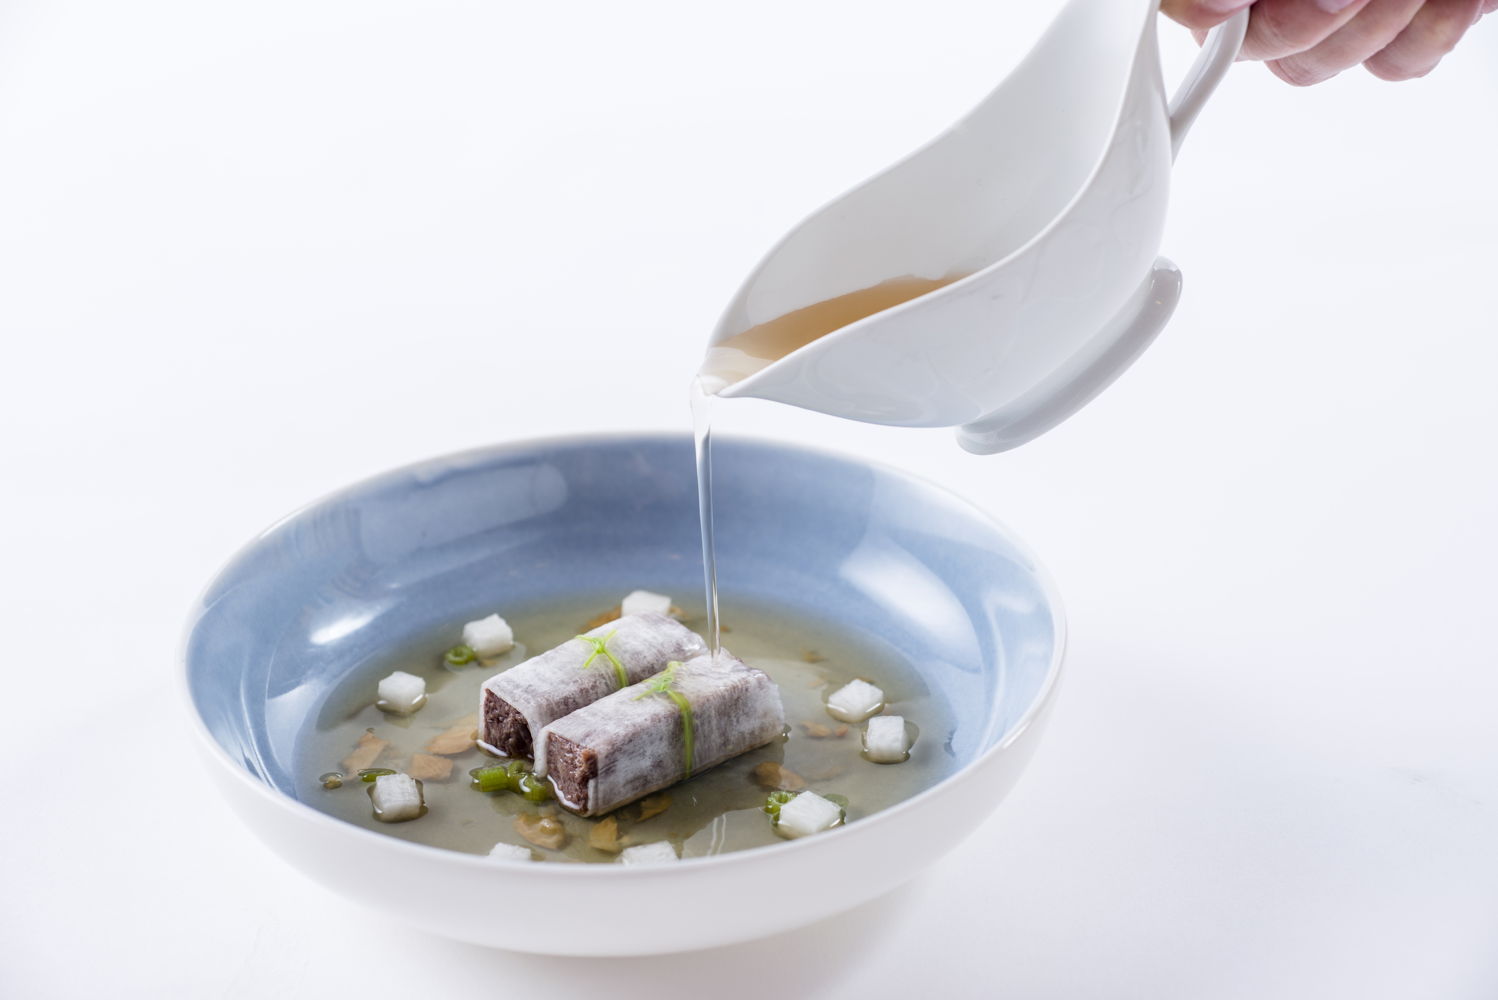 The Peninsula Bangkok: Braised M6 Wagyu Beef Brisket Rolls with Turnip in Beef Soup